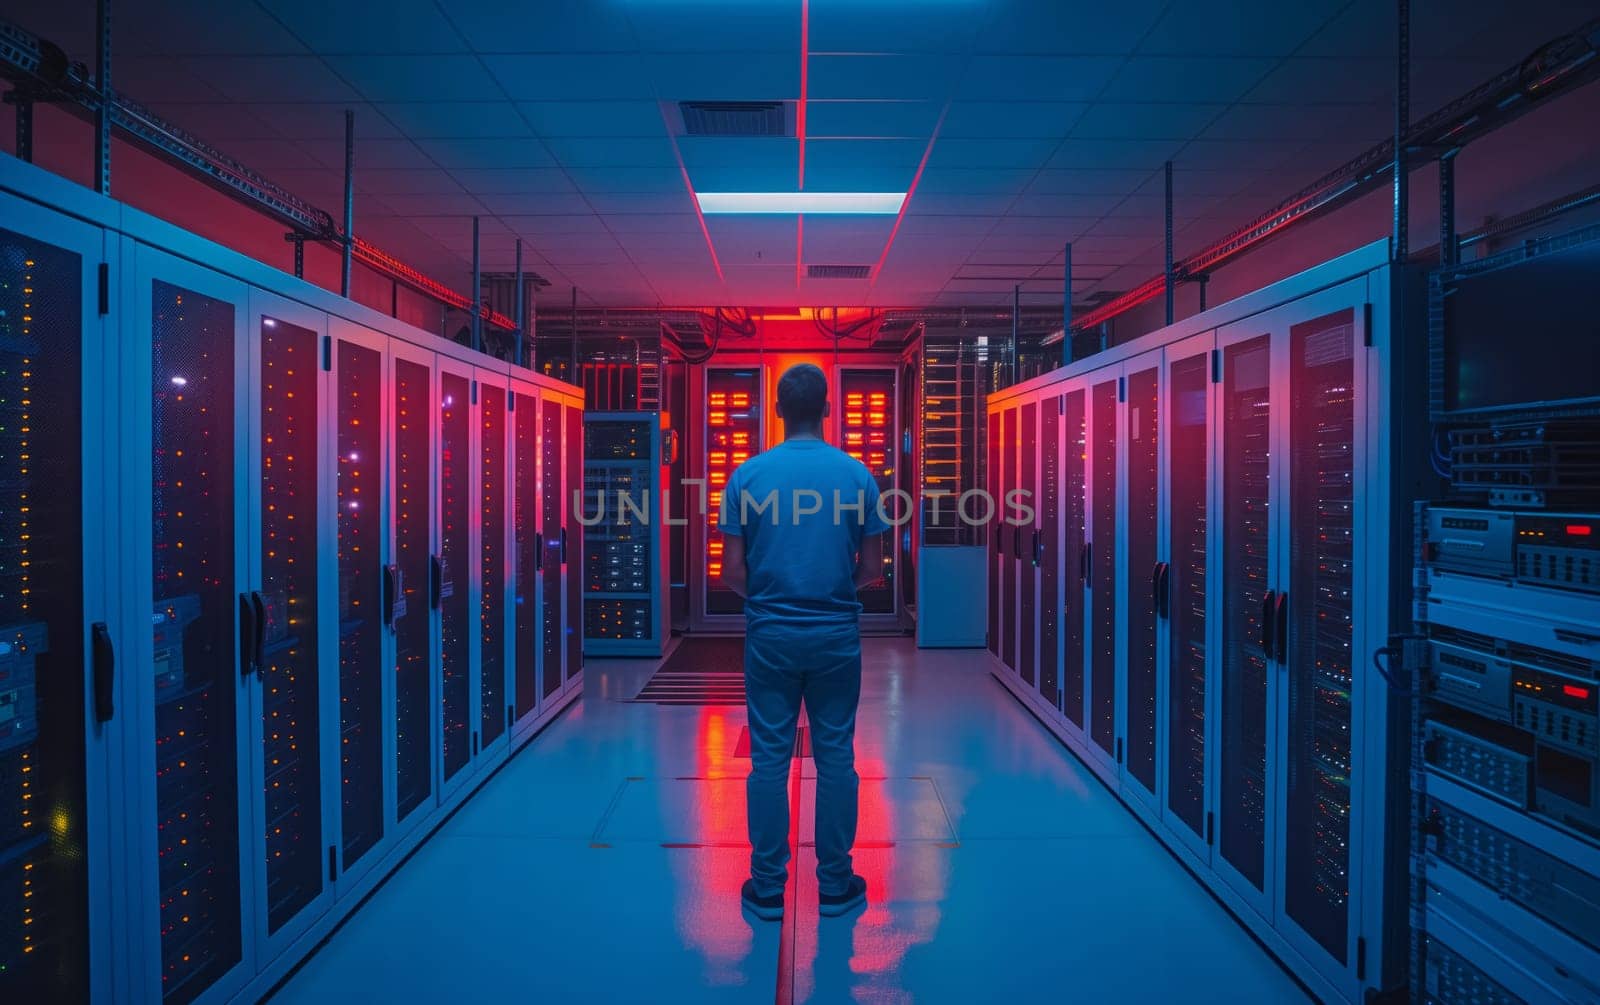 A man stands in a server room at an Azure data center, surrounded by electric blue and magenta architectural elements. The room exudes a sense of symmetry and artistic design